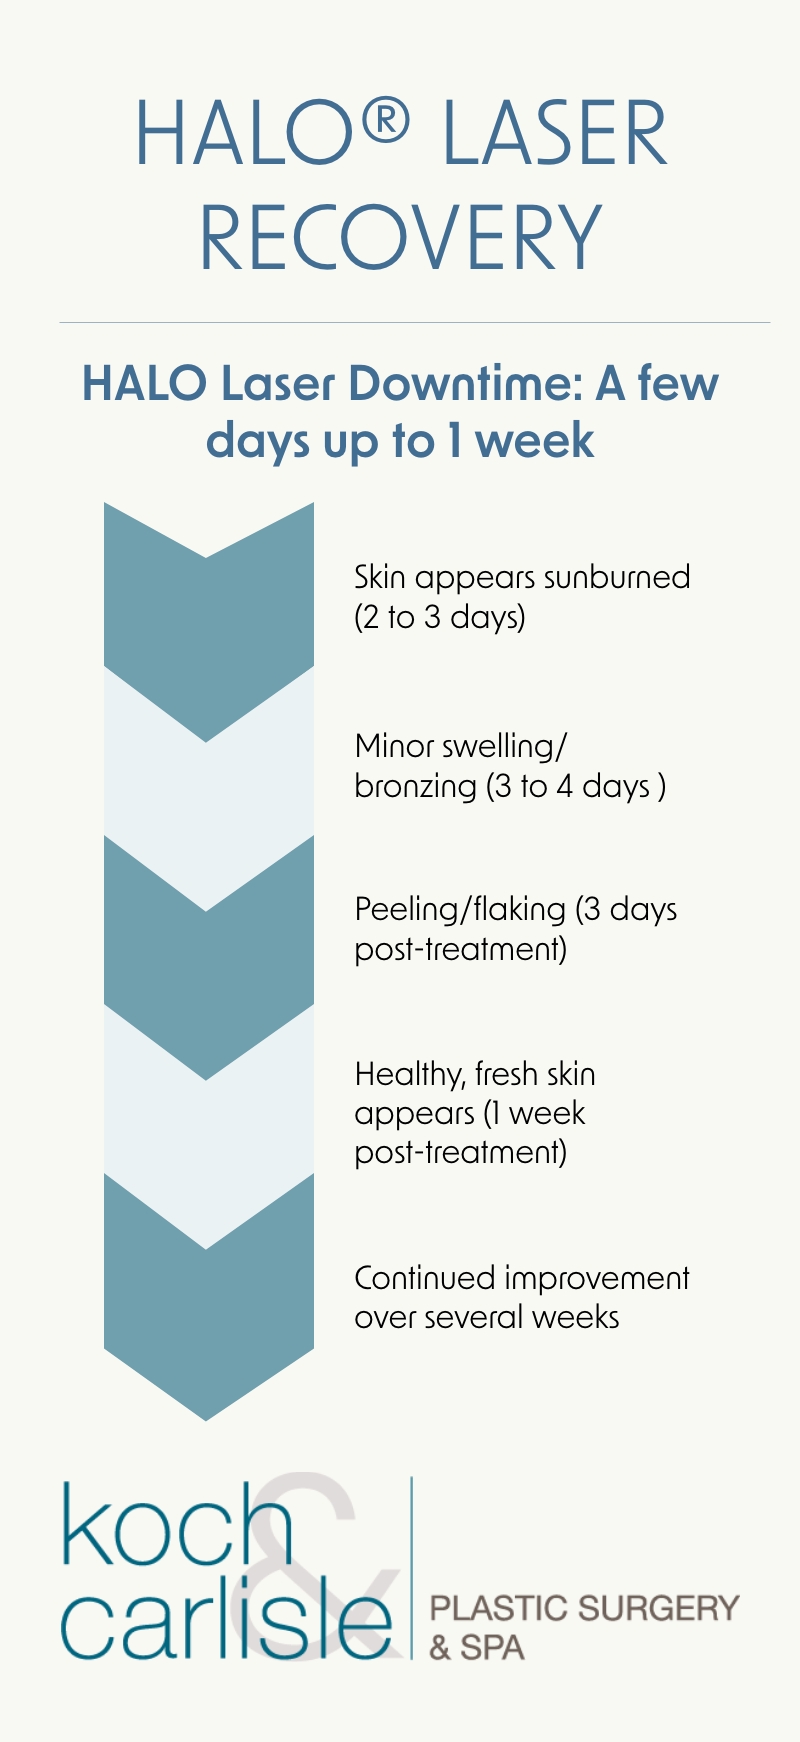 HALO® LASER RECOVERY TIMELINE
HALO Laser Downtime: A few days up to 1 week
Skin appears sunburned (2 to 3 days)
Minor swelling/ bronzing (3 to 4 days)
Peeling/flaking (3 days post-treatment)
Healthy, fresh skin appears (1 week
post-treatment)
Continued improvement over several weeks